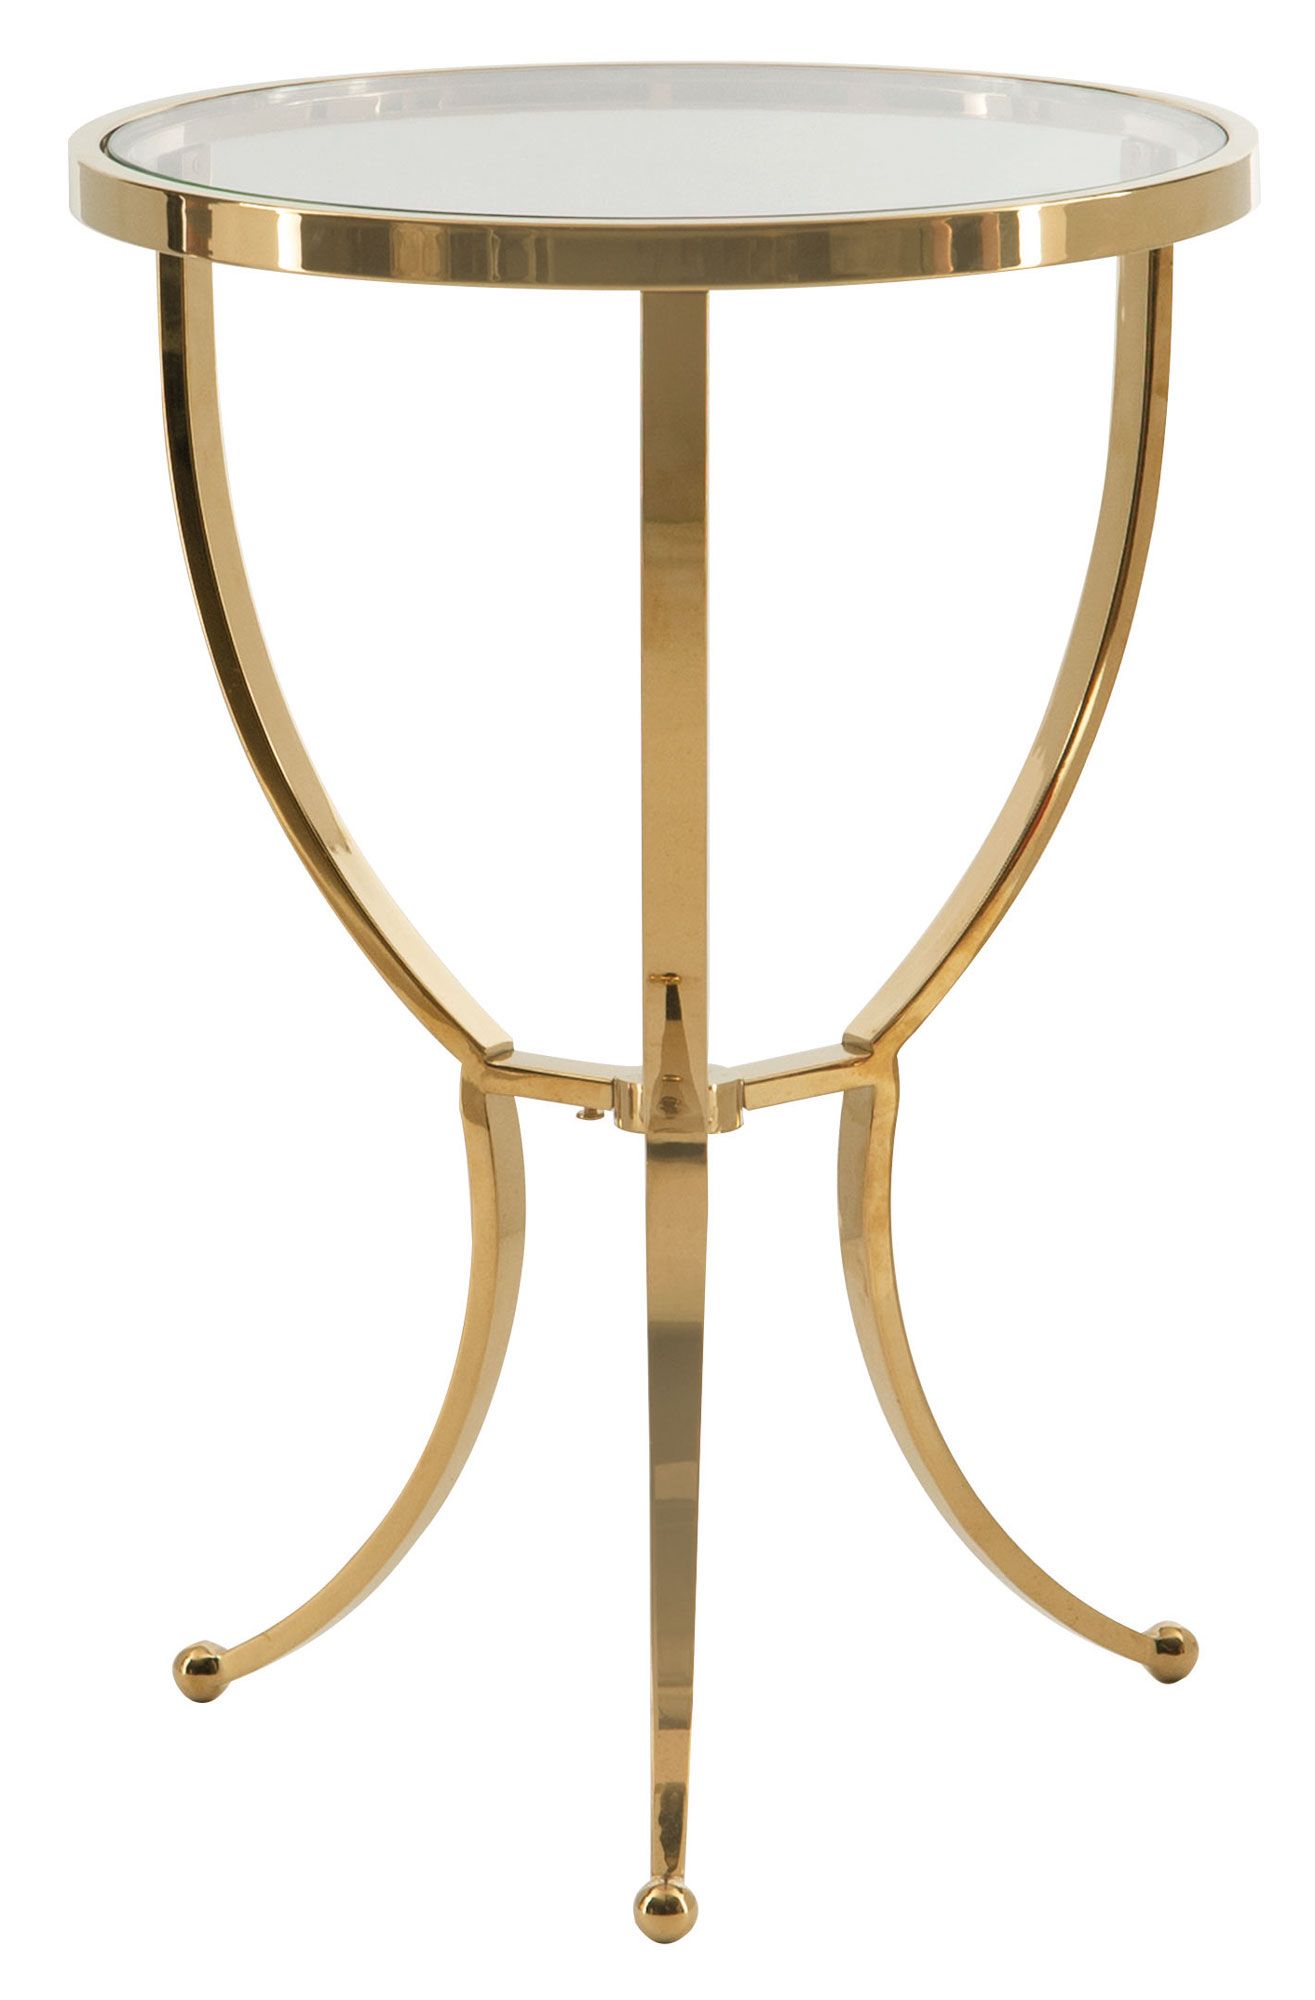 adella round chairside table bernhardt dia gold accent goldfinish cardboard mirage mirrored cabinet wicker lamp sets clearance metal bookshelf cocktail linens square patio side